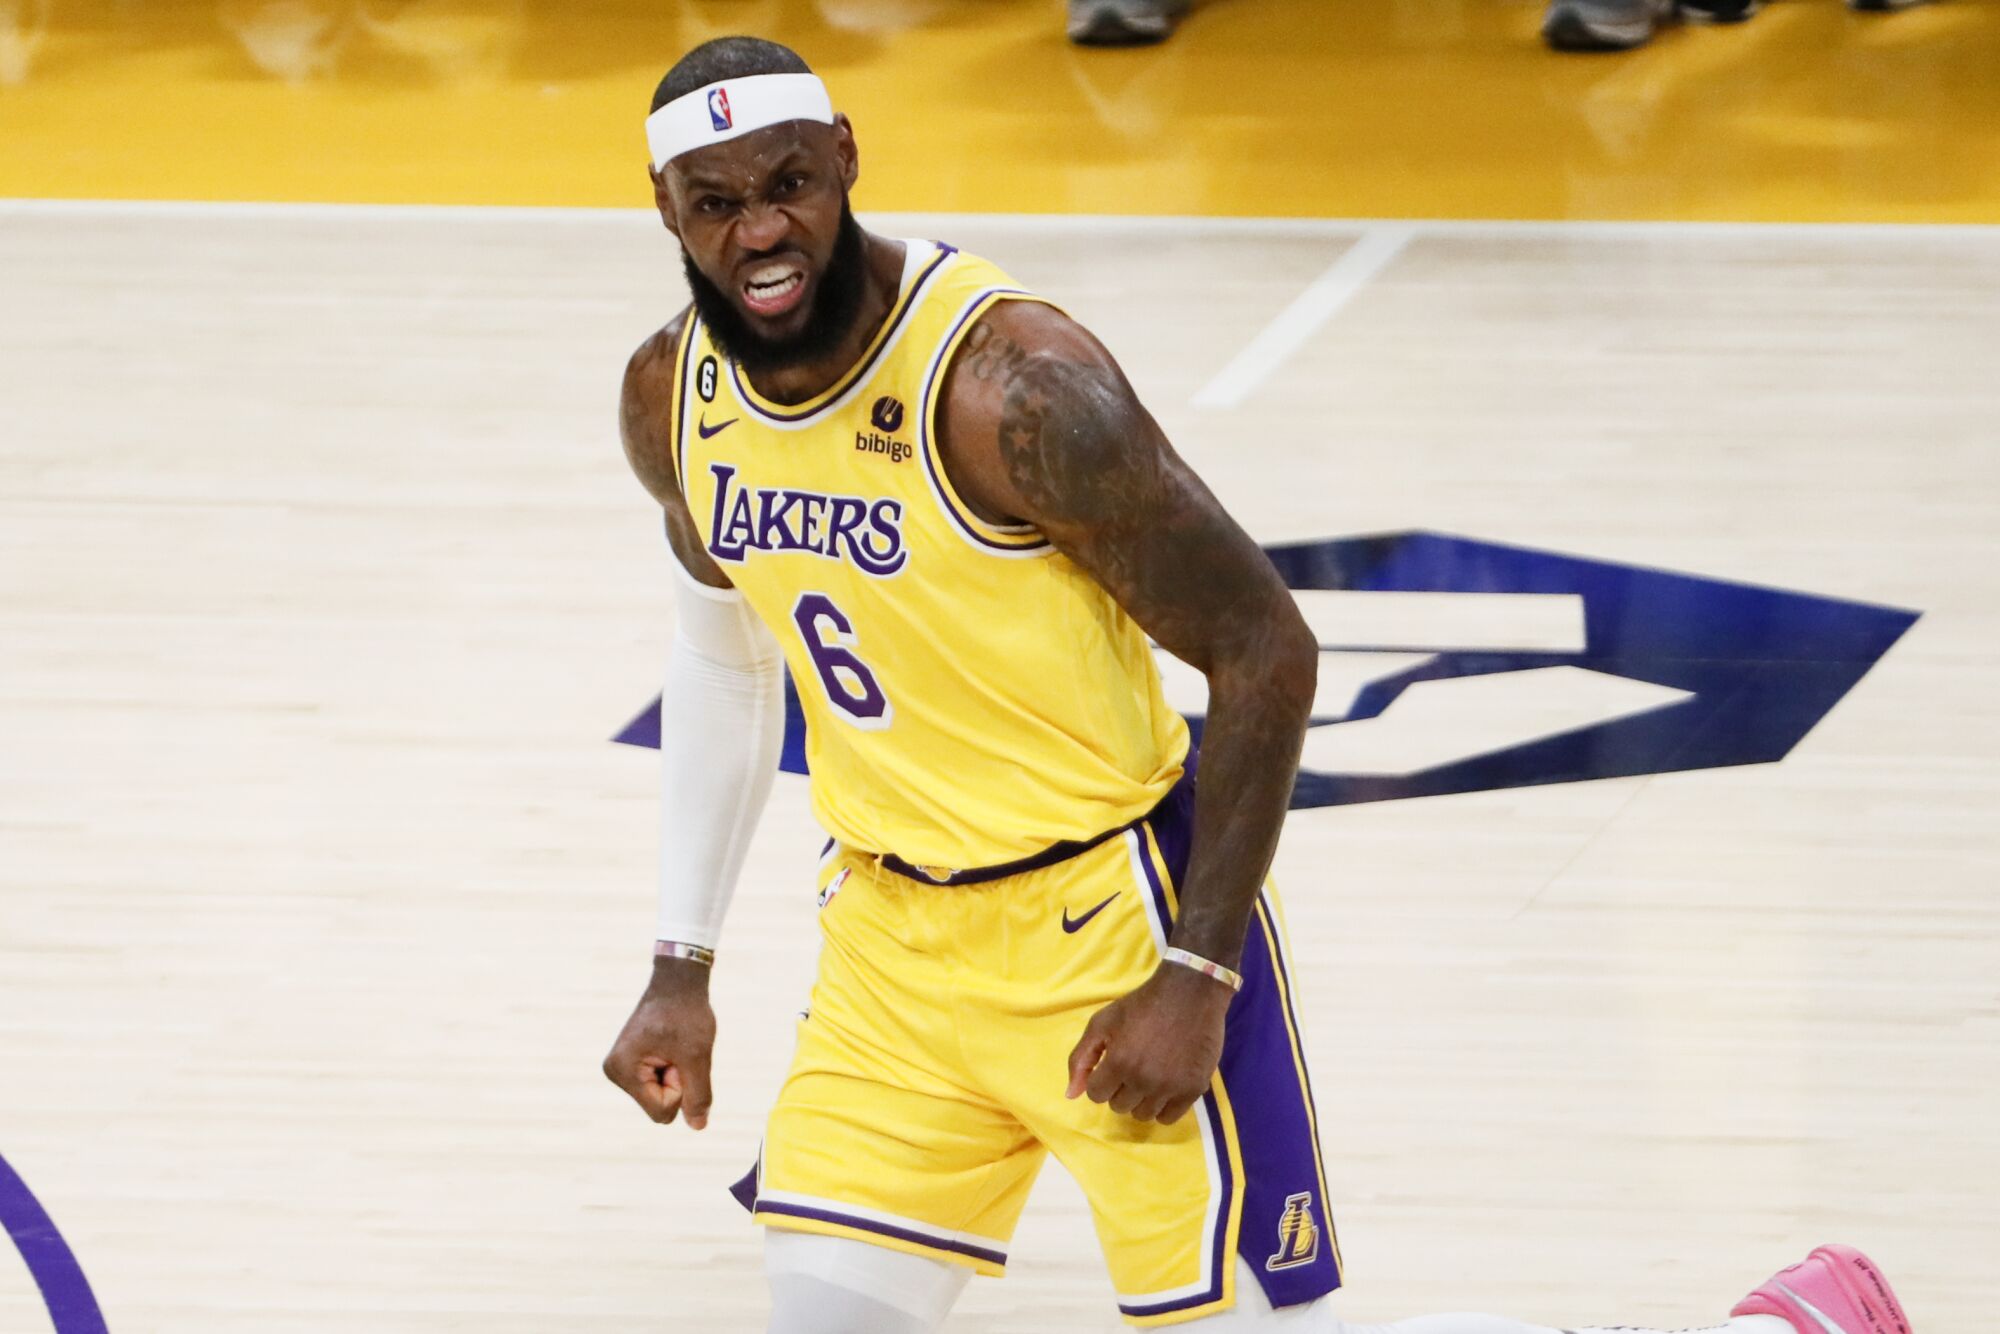 Los Angeles Lakers forward LeBron James sneers after making a three-point shot in the third quarter.